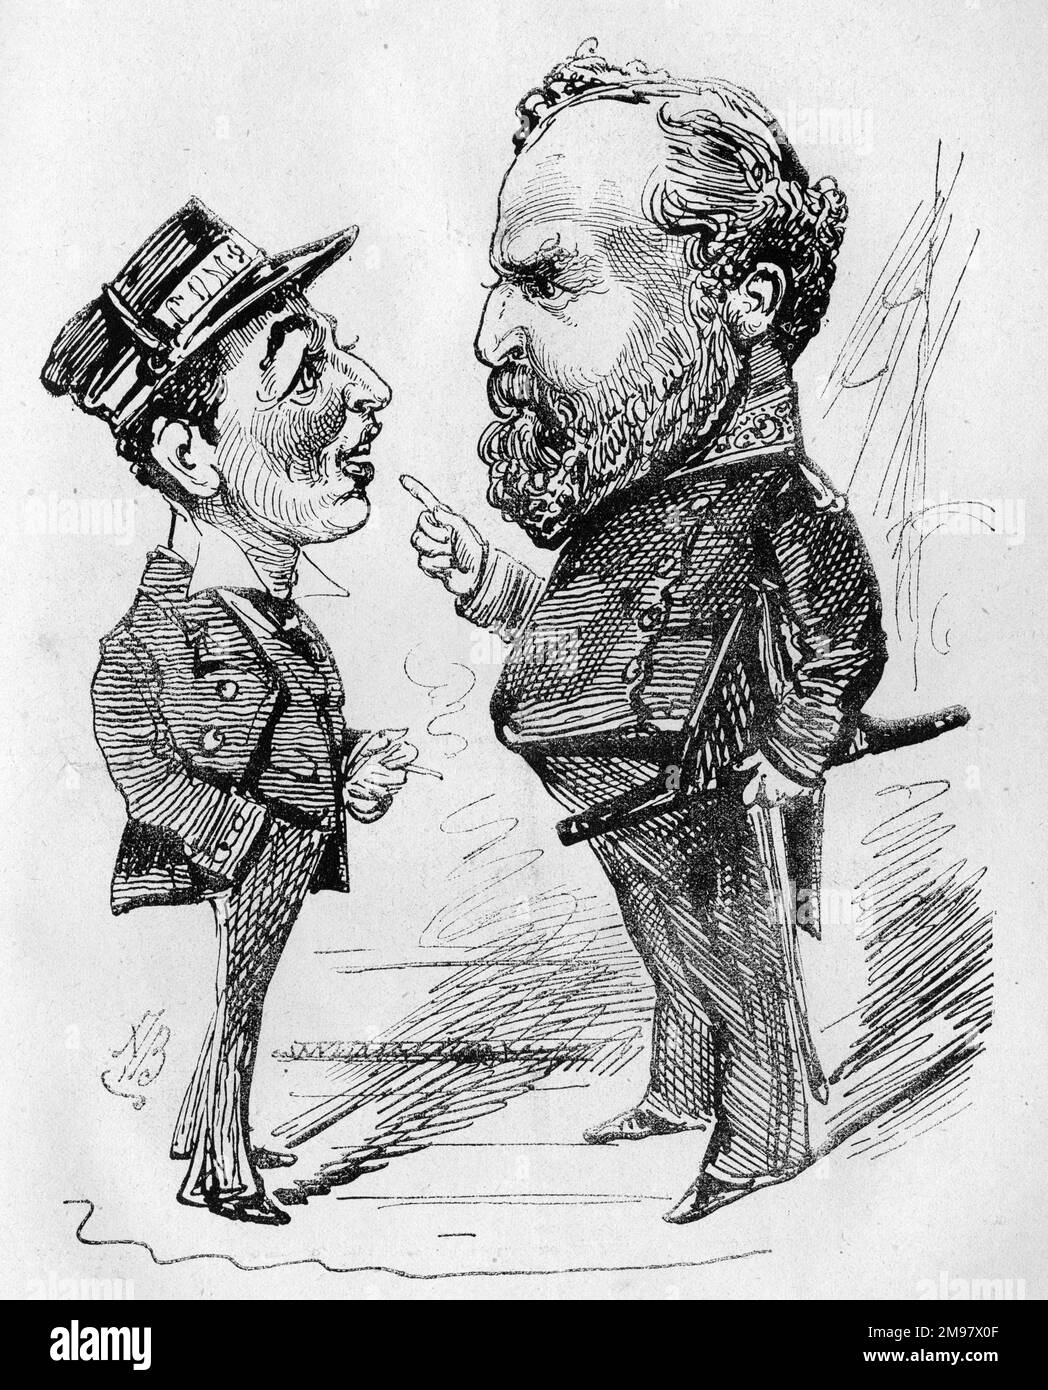 Cartoon of Lord Charles William de la Poer Beresford (1846-1919), at this time a Royal Navy captain (later an Admiral), and Admiral Frederick Beauchamp Paget Seymour (1821-1895).  The Admiral asks Beresford to ensure that looting does not take place on either side during the bombardment of Alexandria during the Anglo-Egyptian war of 1882, when he served as Captain of the gunboat HMS Condor. Stock Photo